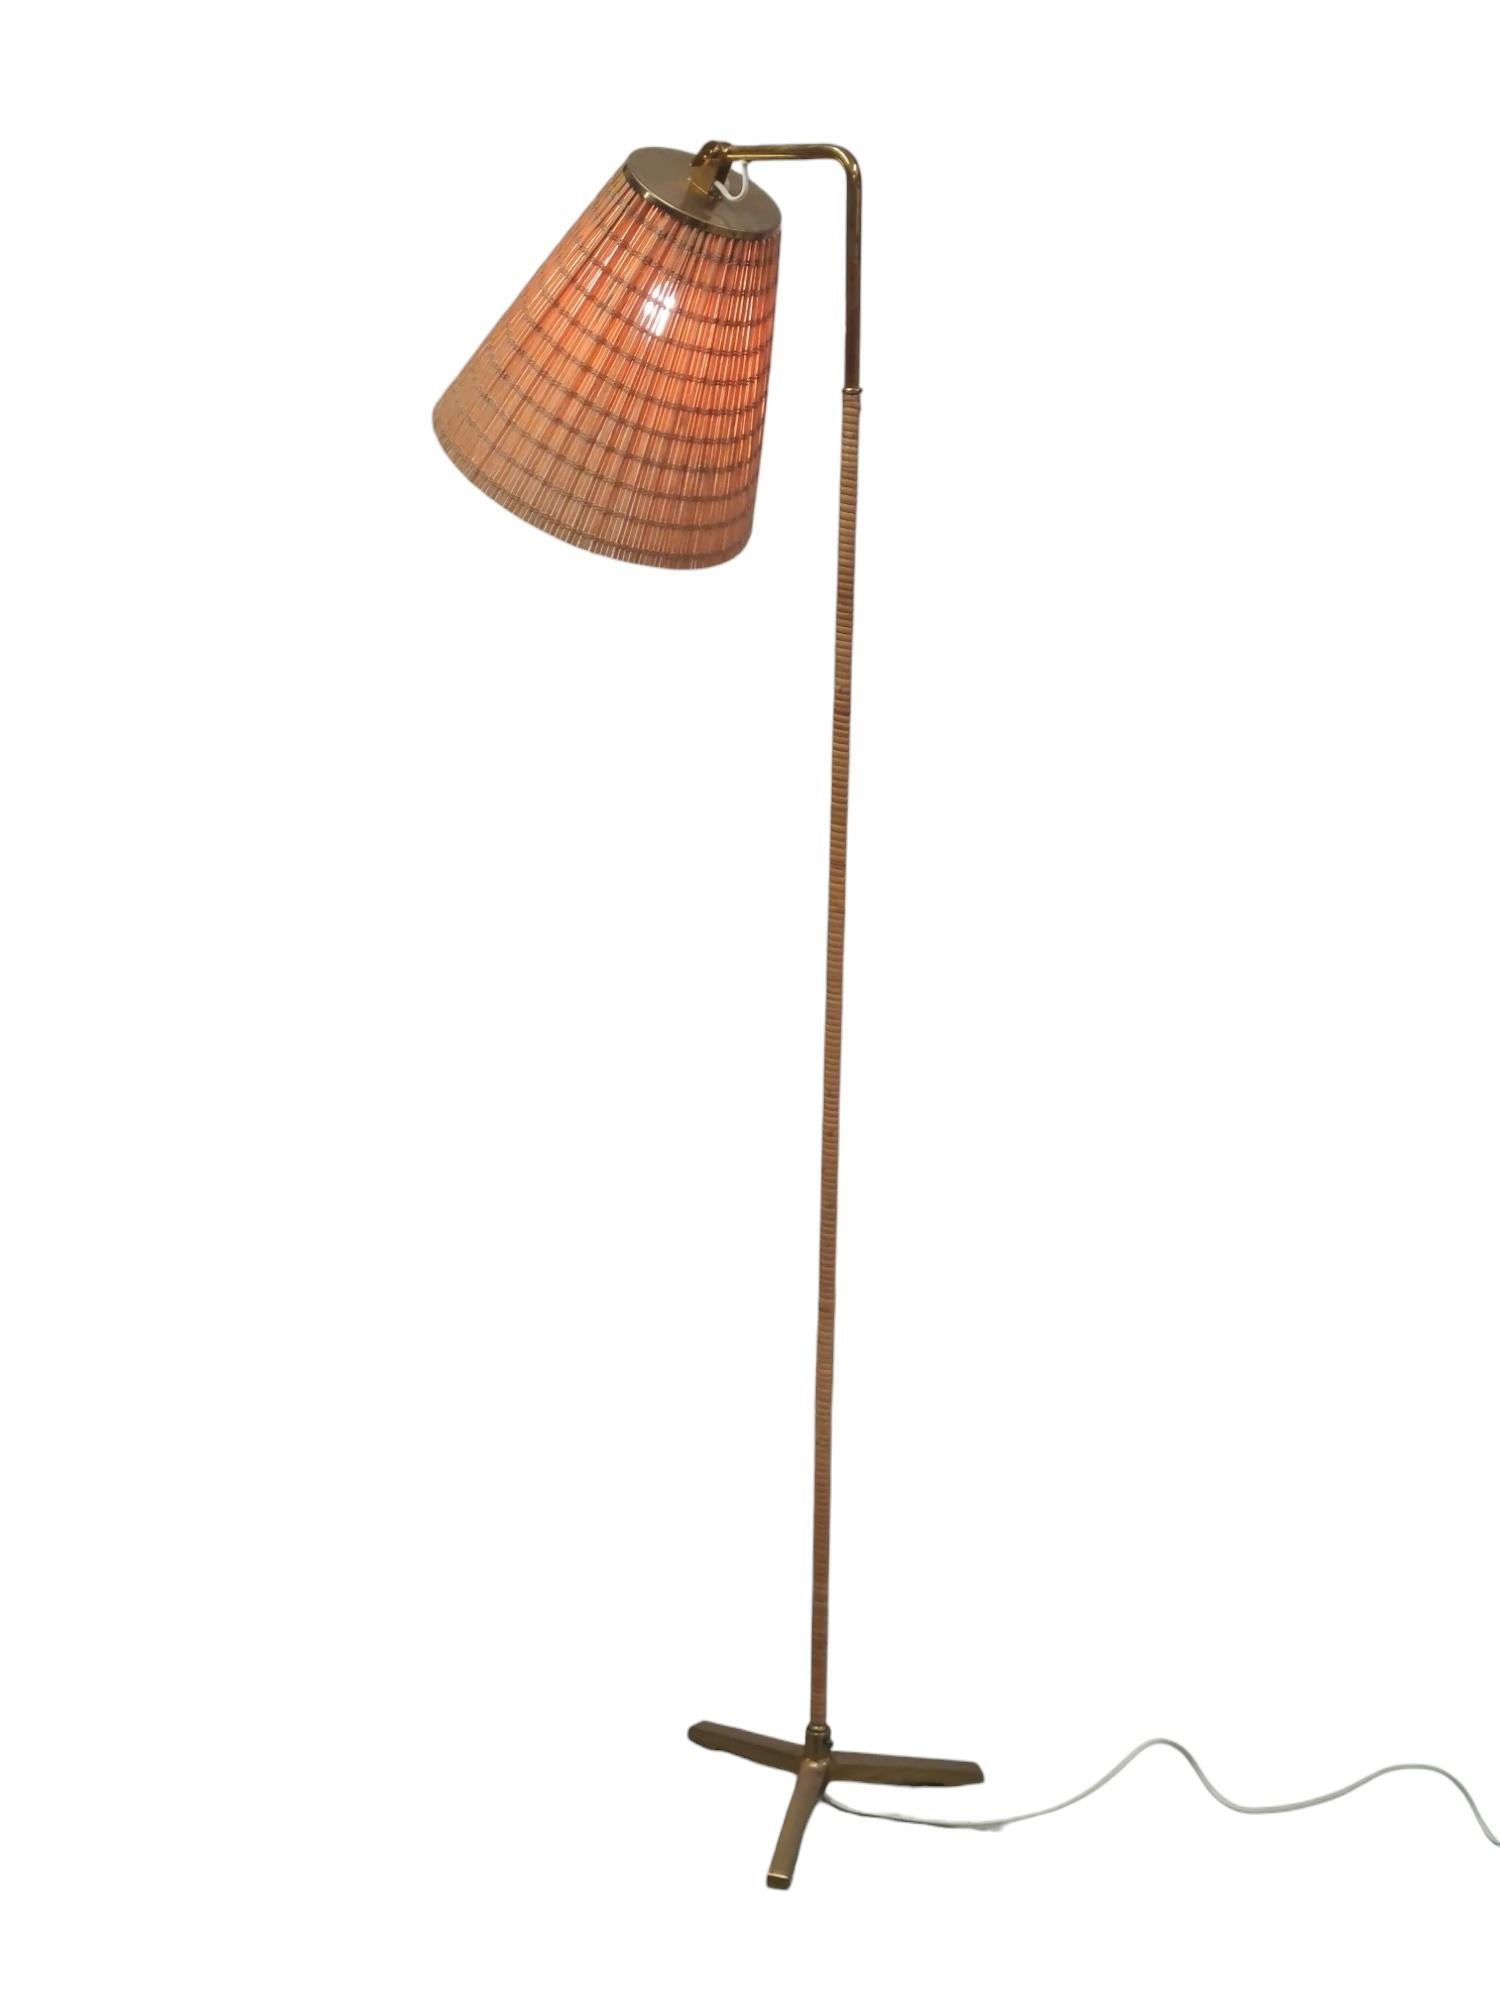 Lampadaire Paavo Tynell modèle 9631, Taito Oy en vente 3